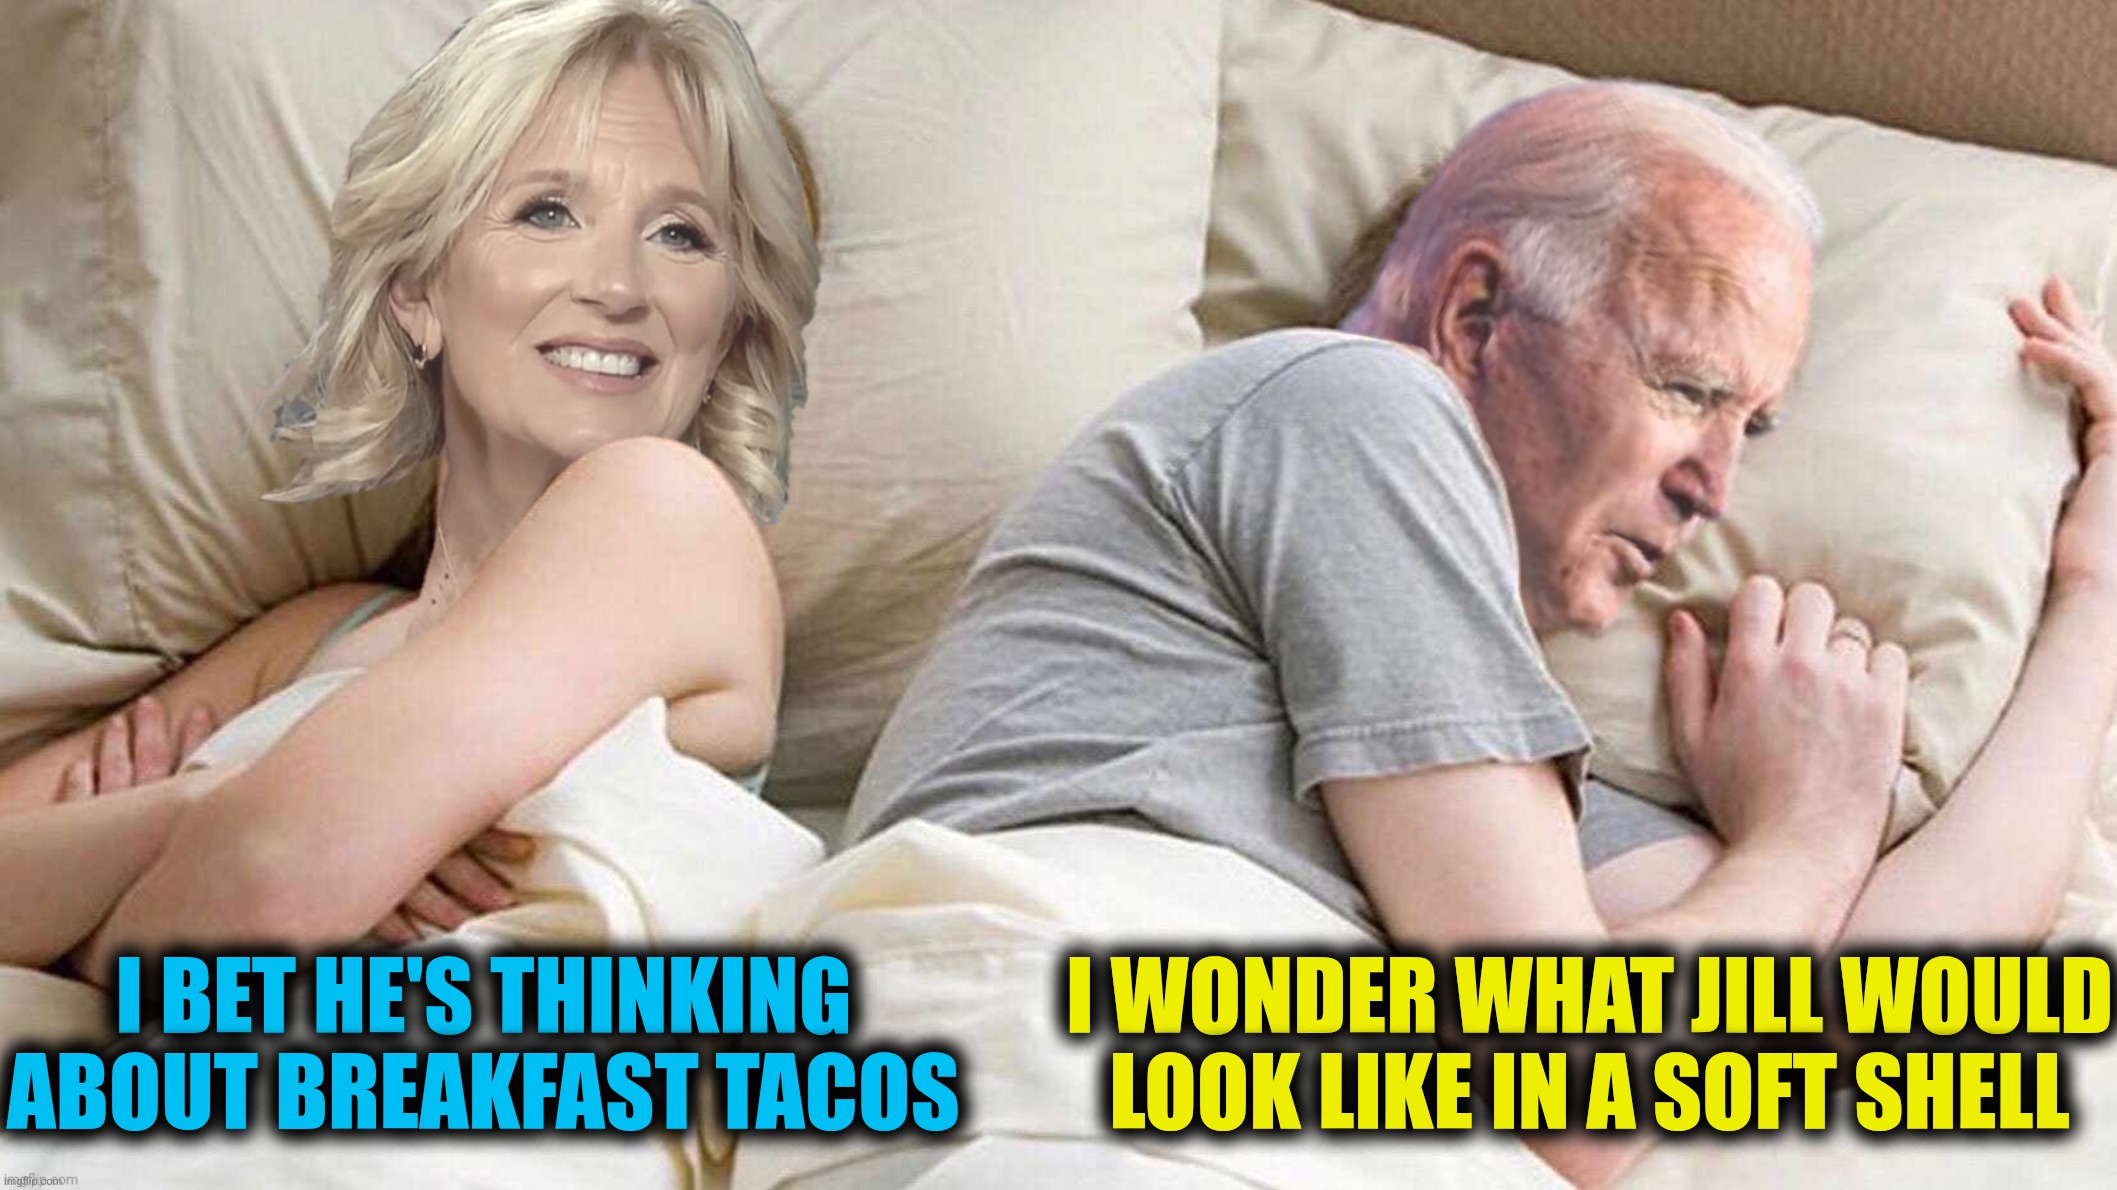 I BET HE'S THINKING ABOUT BREAKFAST TACOS I WONDER WHAT JILL WOULD LOOK LIKE IN A SOFT SHELL | made w/ Imgflip meme maker